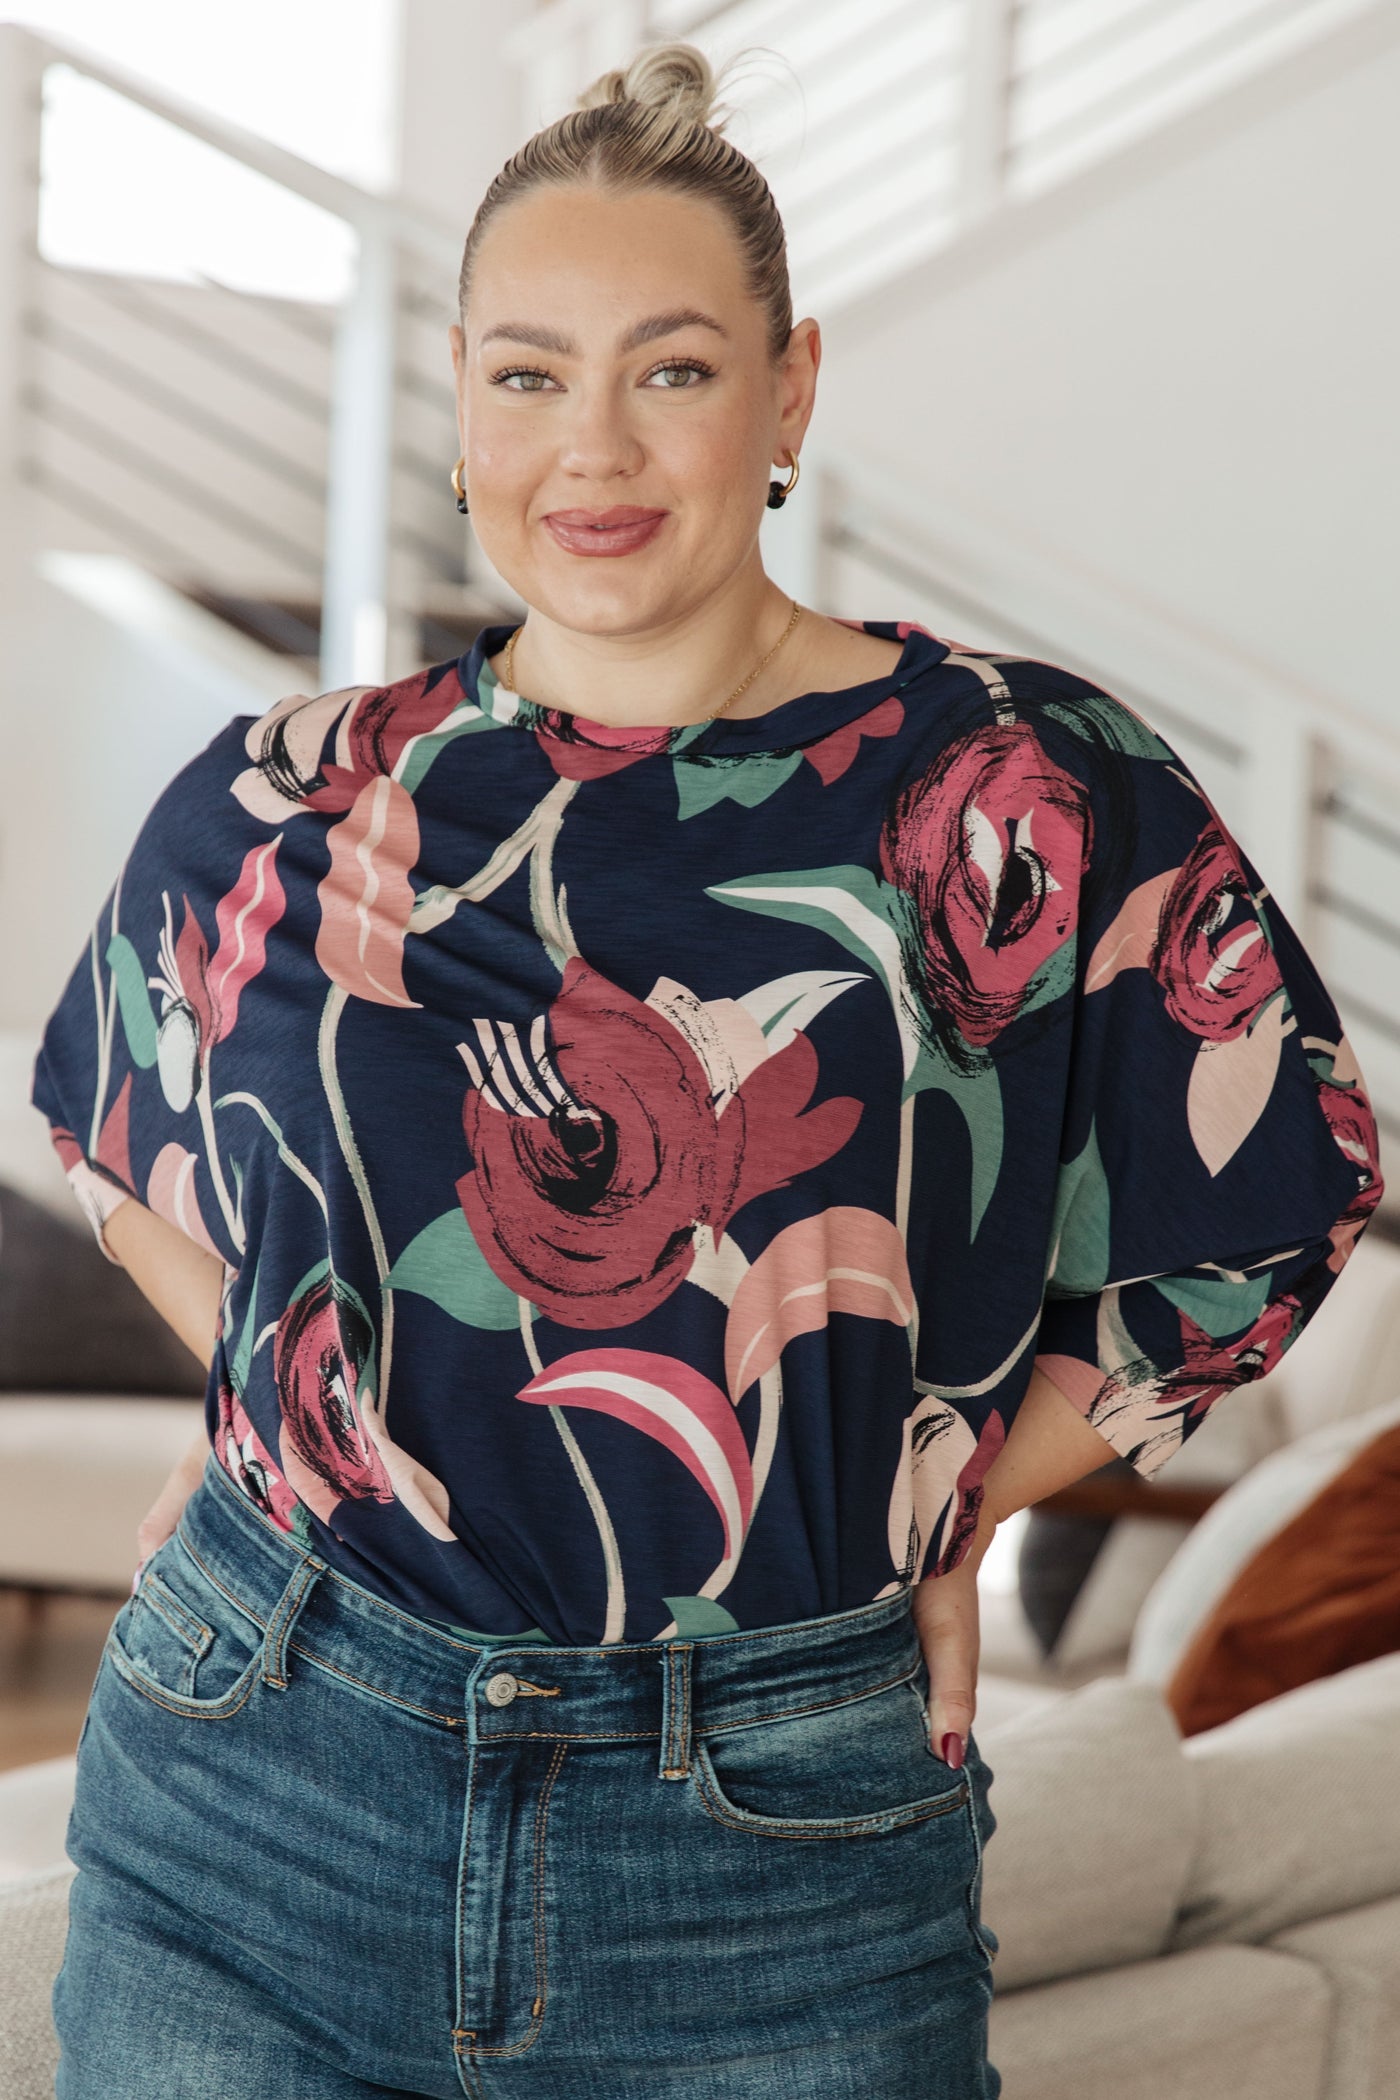 The Float On Floral Top is the perfect addition to your wardrobe. The boxy fit and cuffed dolman sleeves make it both comfortable and flattering, and the statement large scale floral print adds a touch of personality.